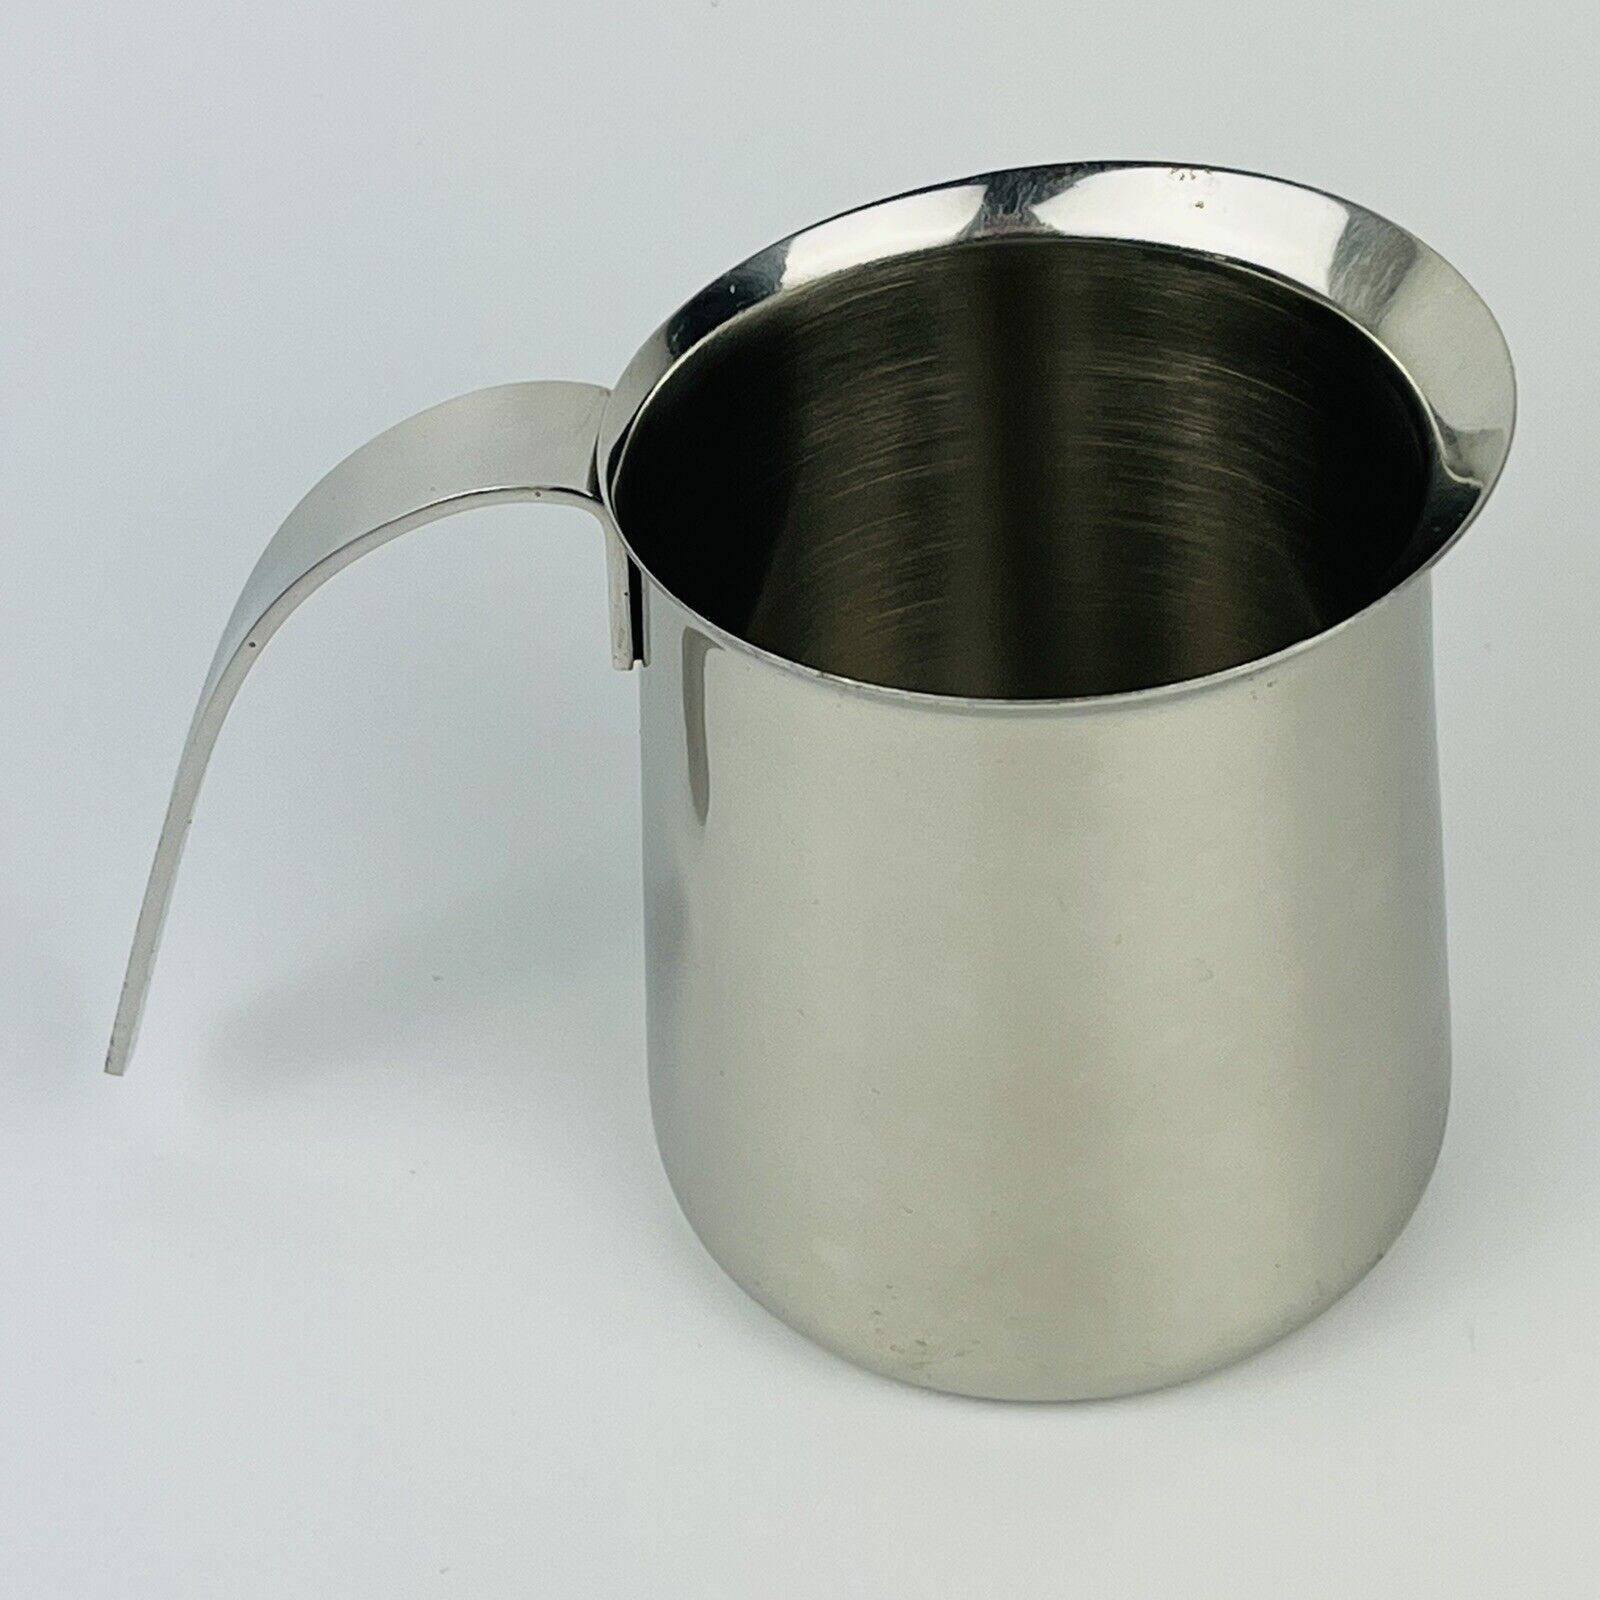 Vintage Krups Espresso Coffee Cream Pitcher Stainless Steel 18-8 Made in PRC